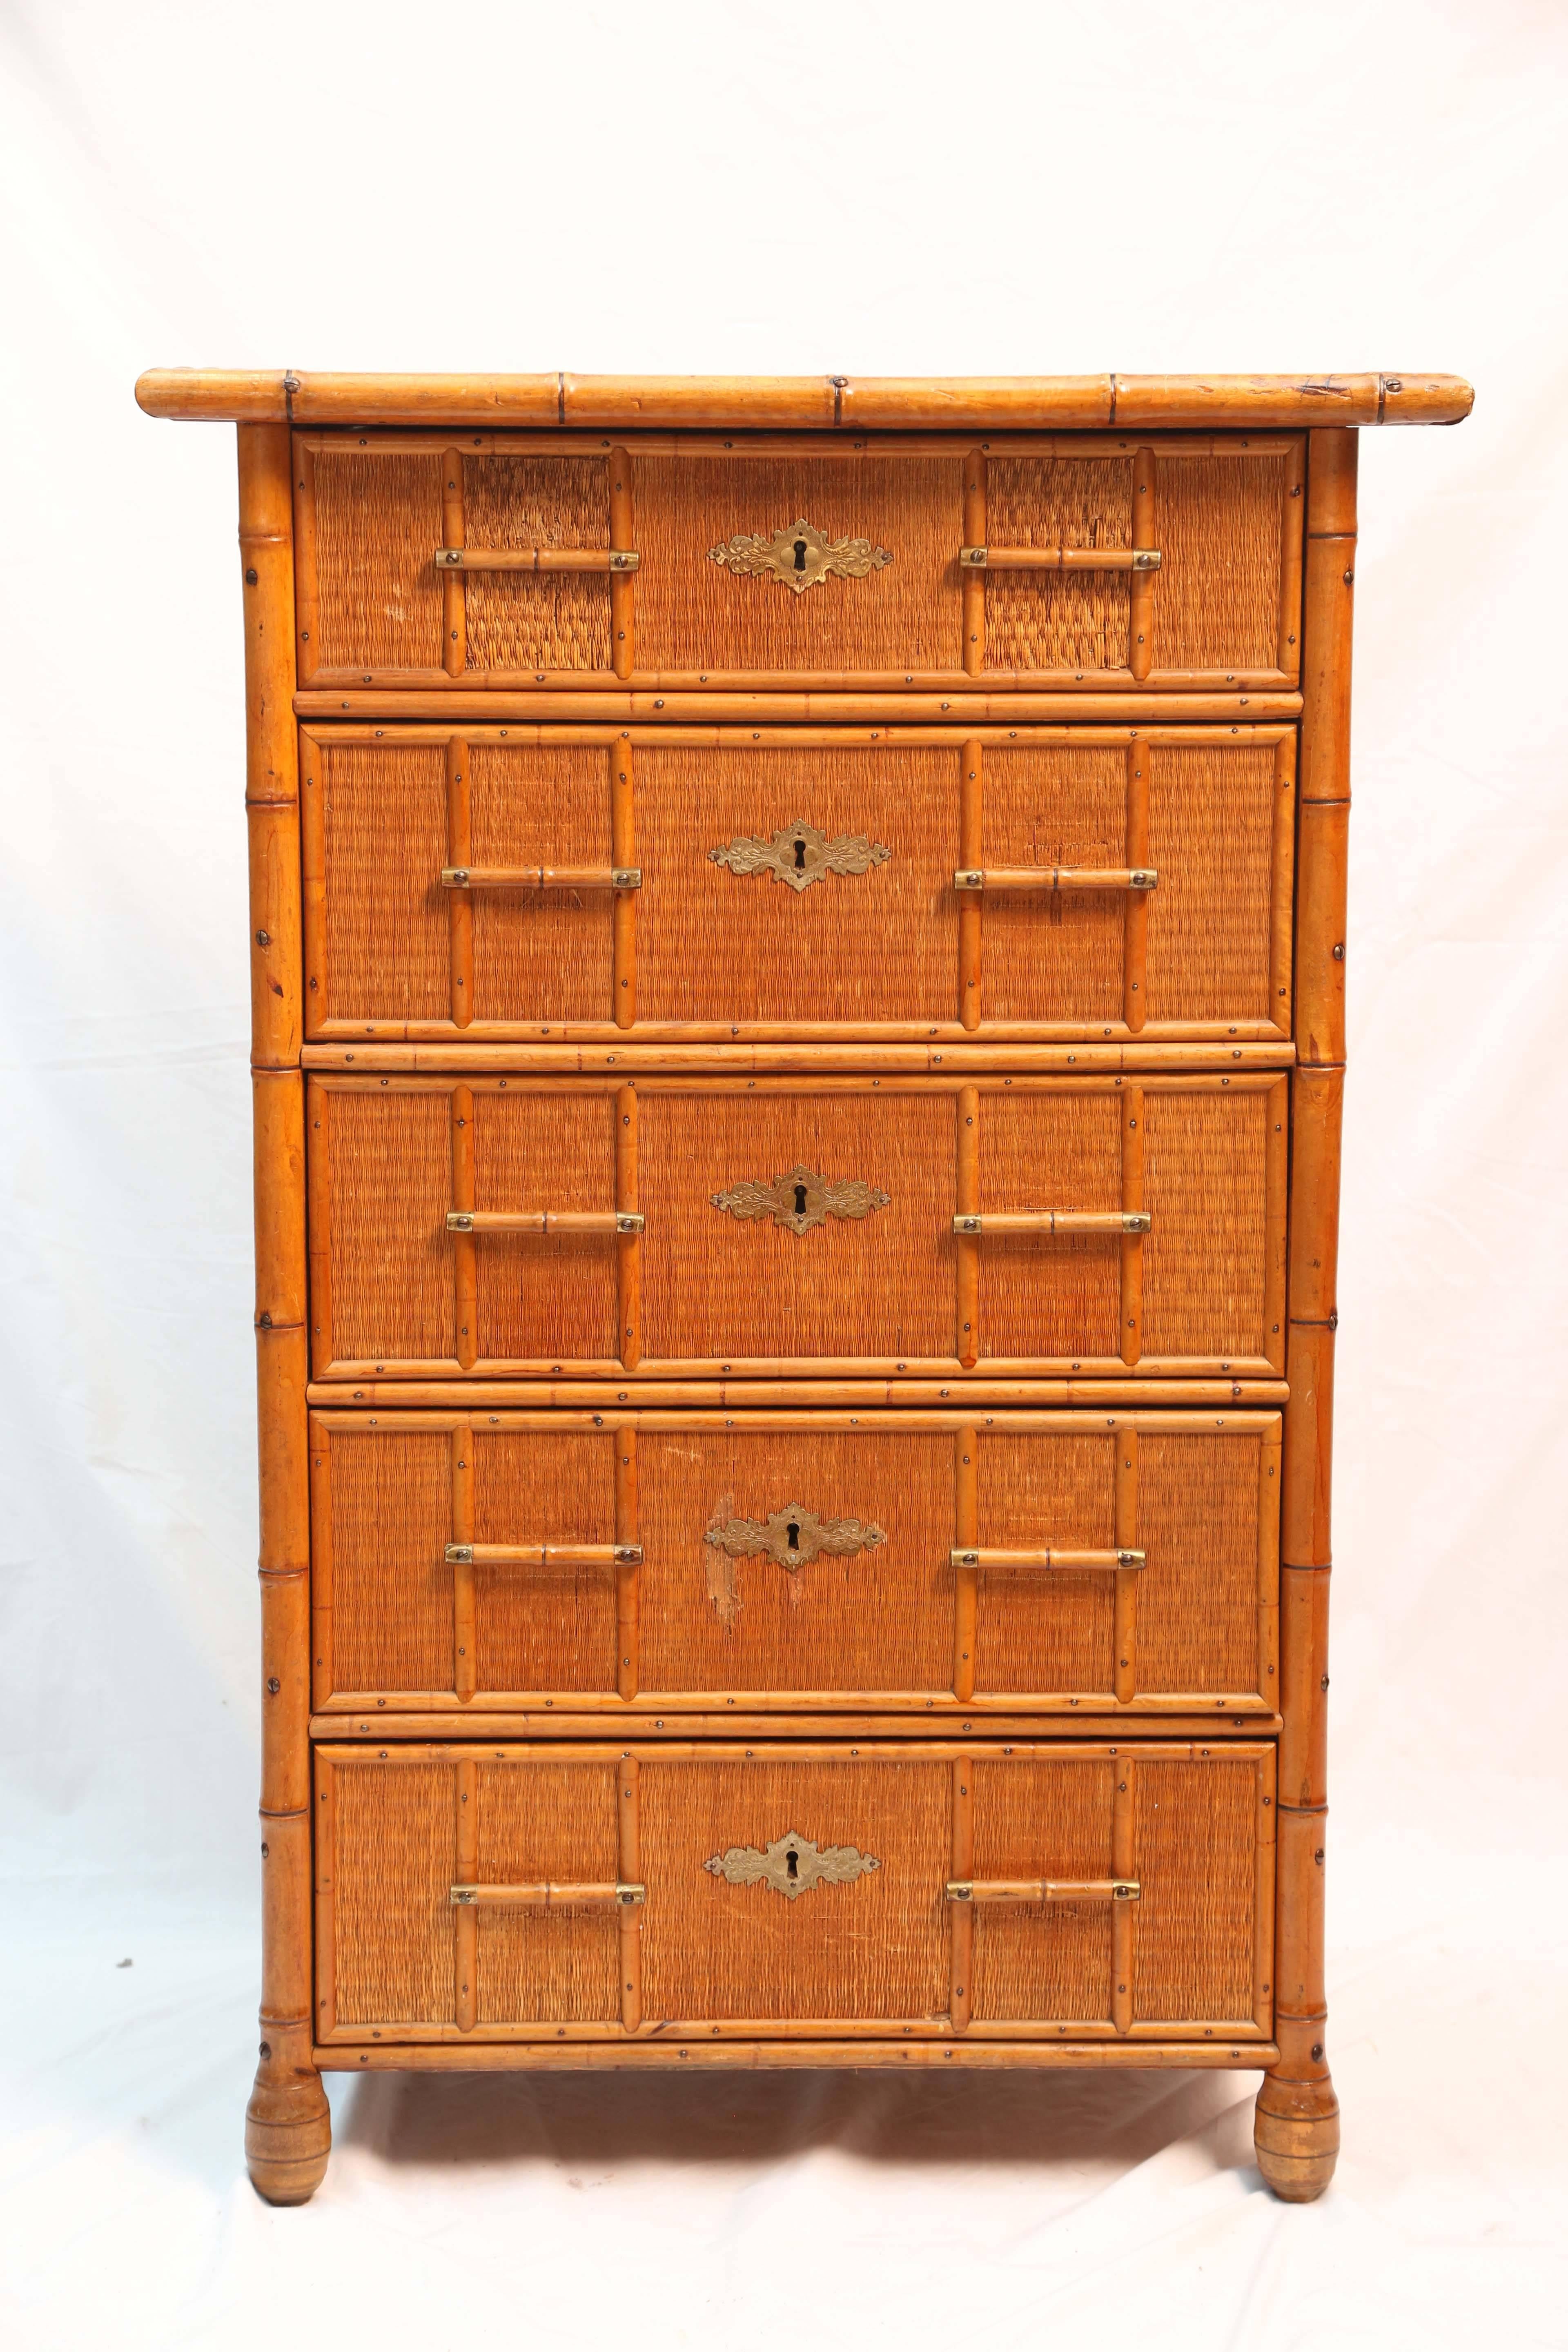 The unusual chest is appointed with root feet and tailored bamboo drawer pulls with brass appointments.